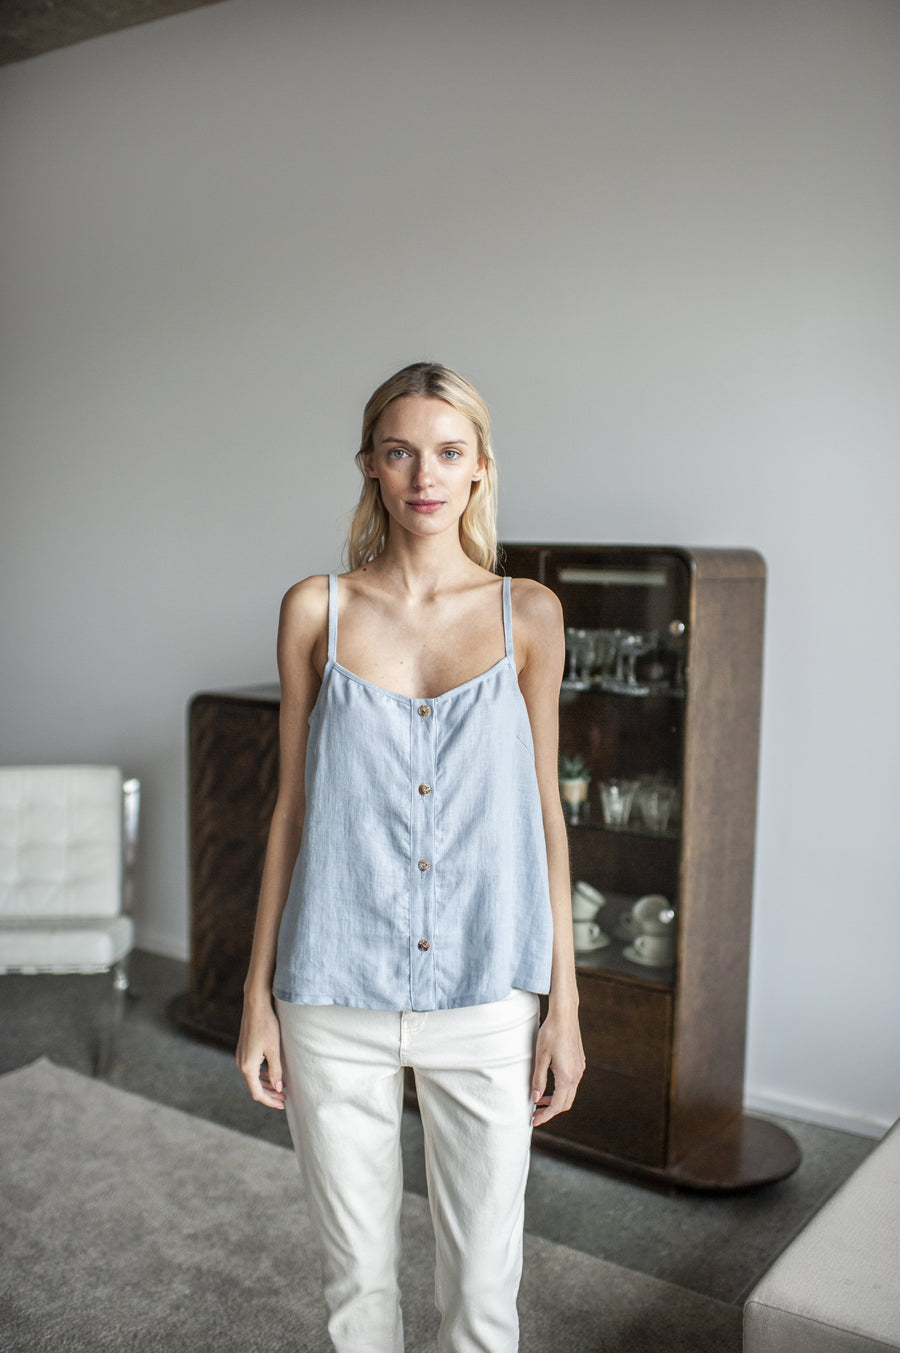 Walnut Brown Linen Cami Top With Straps